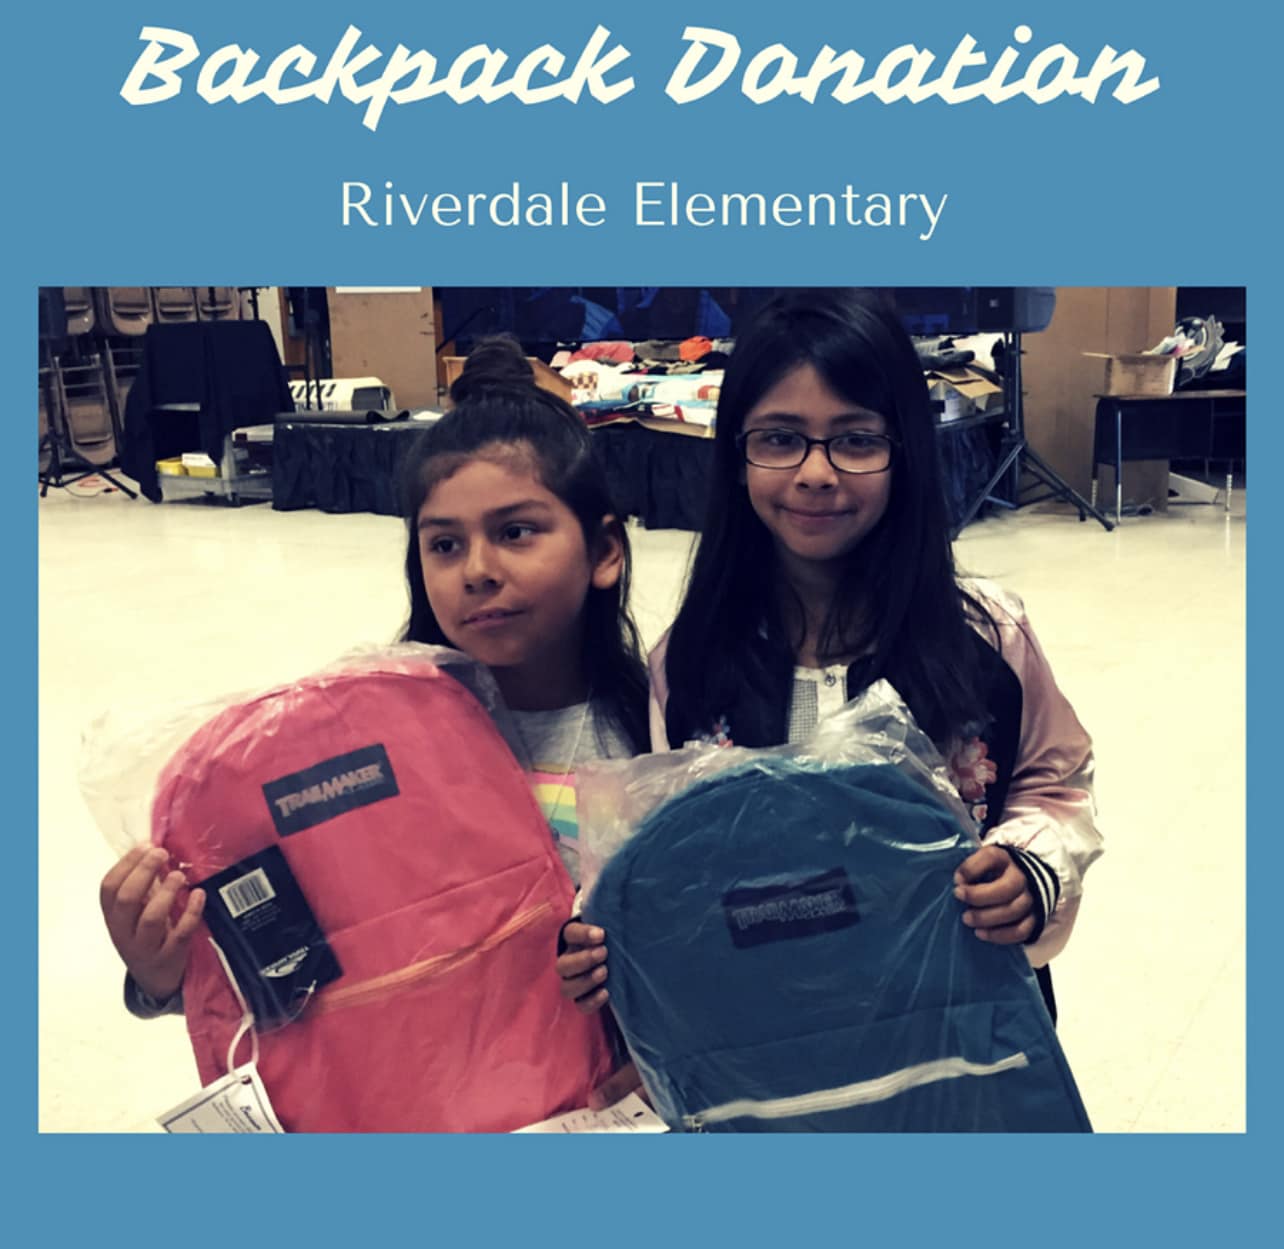 Backpack donation